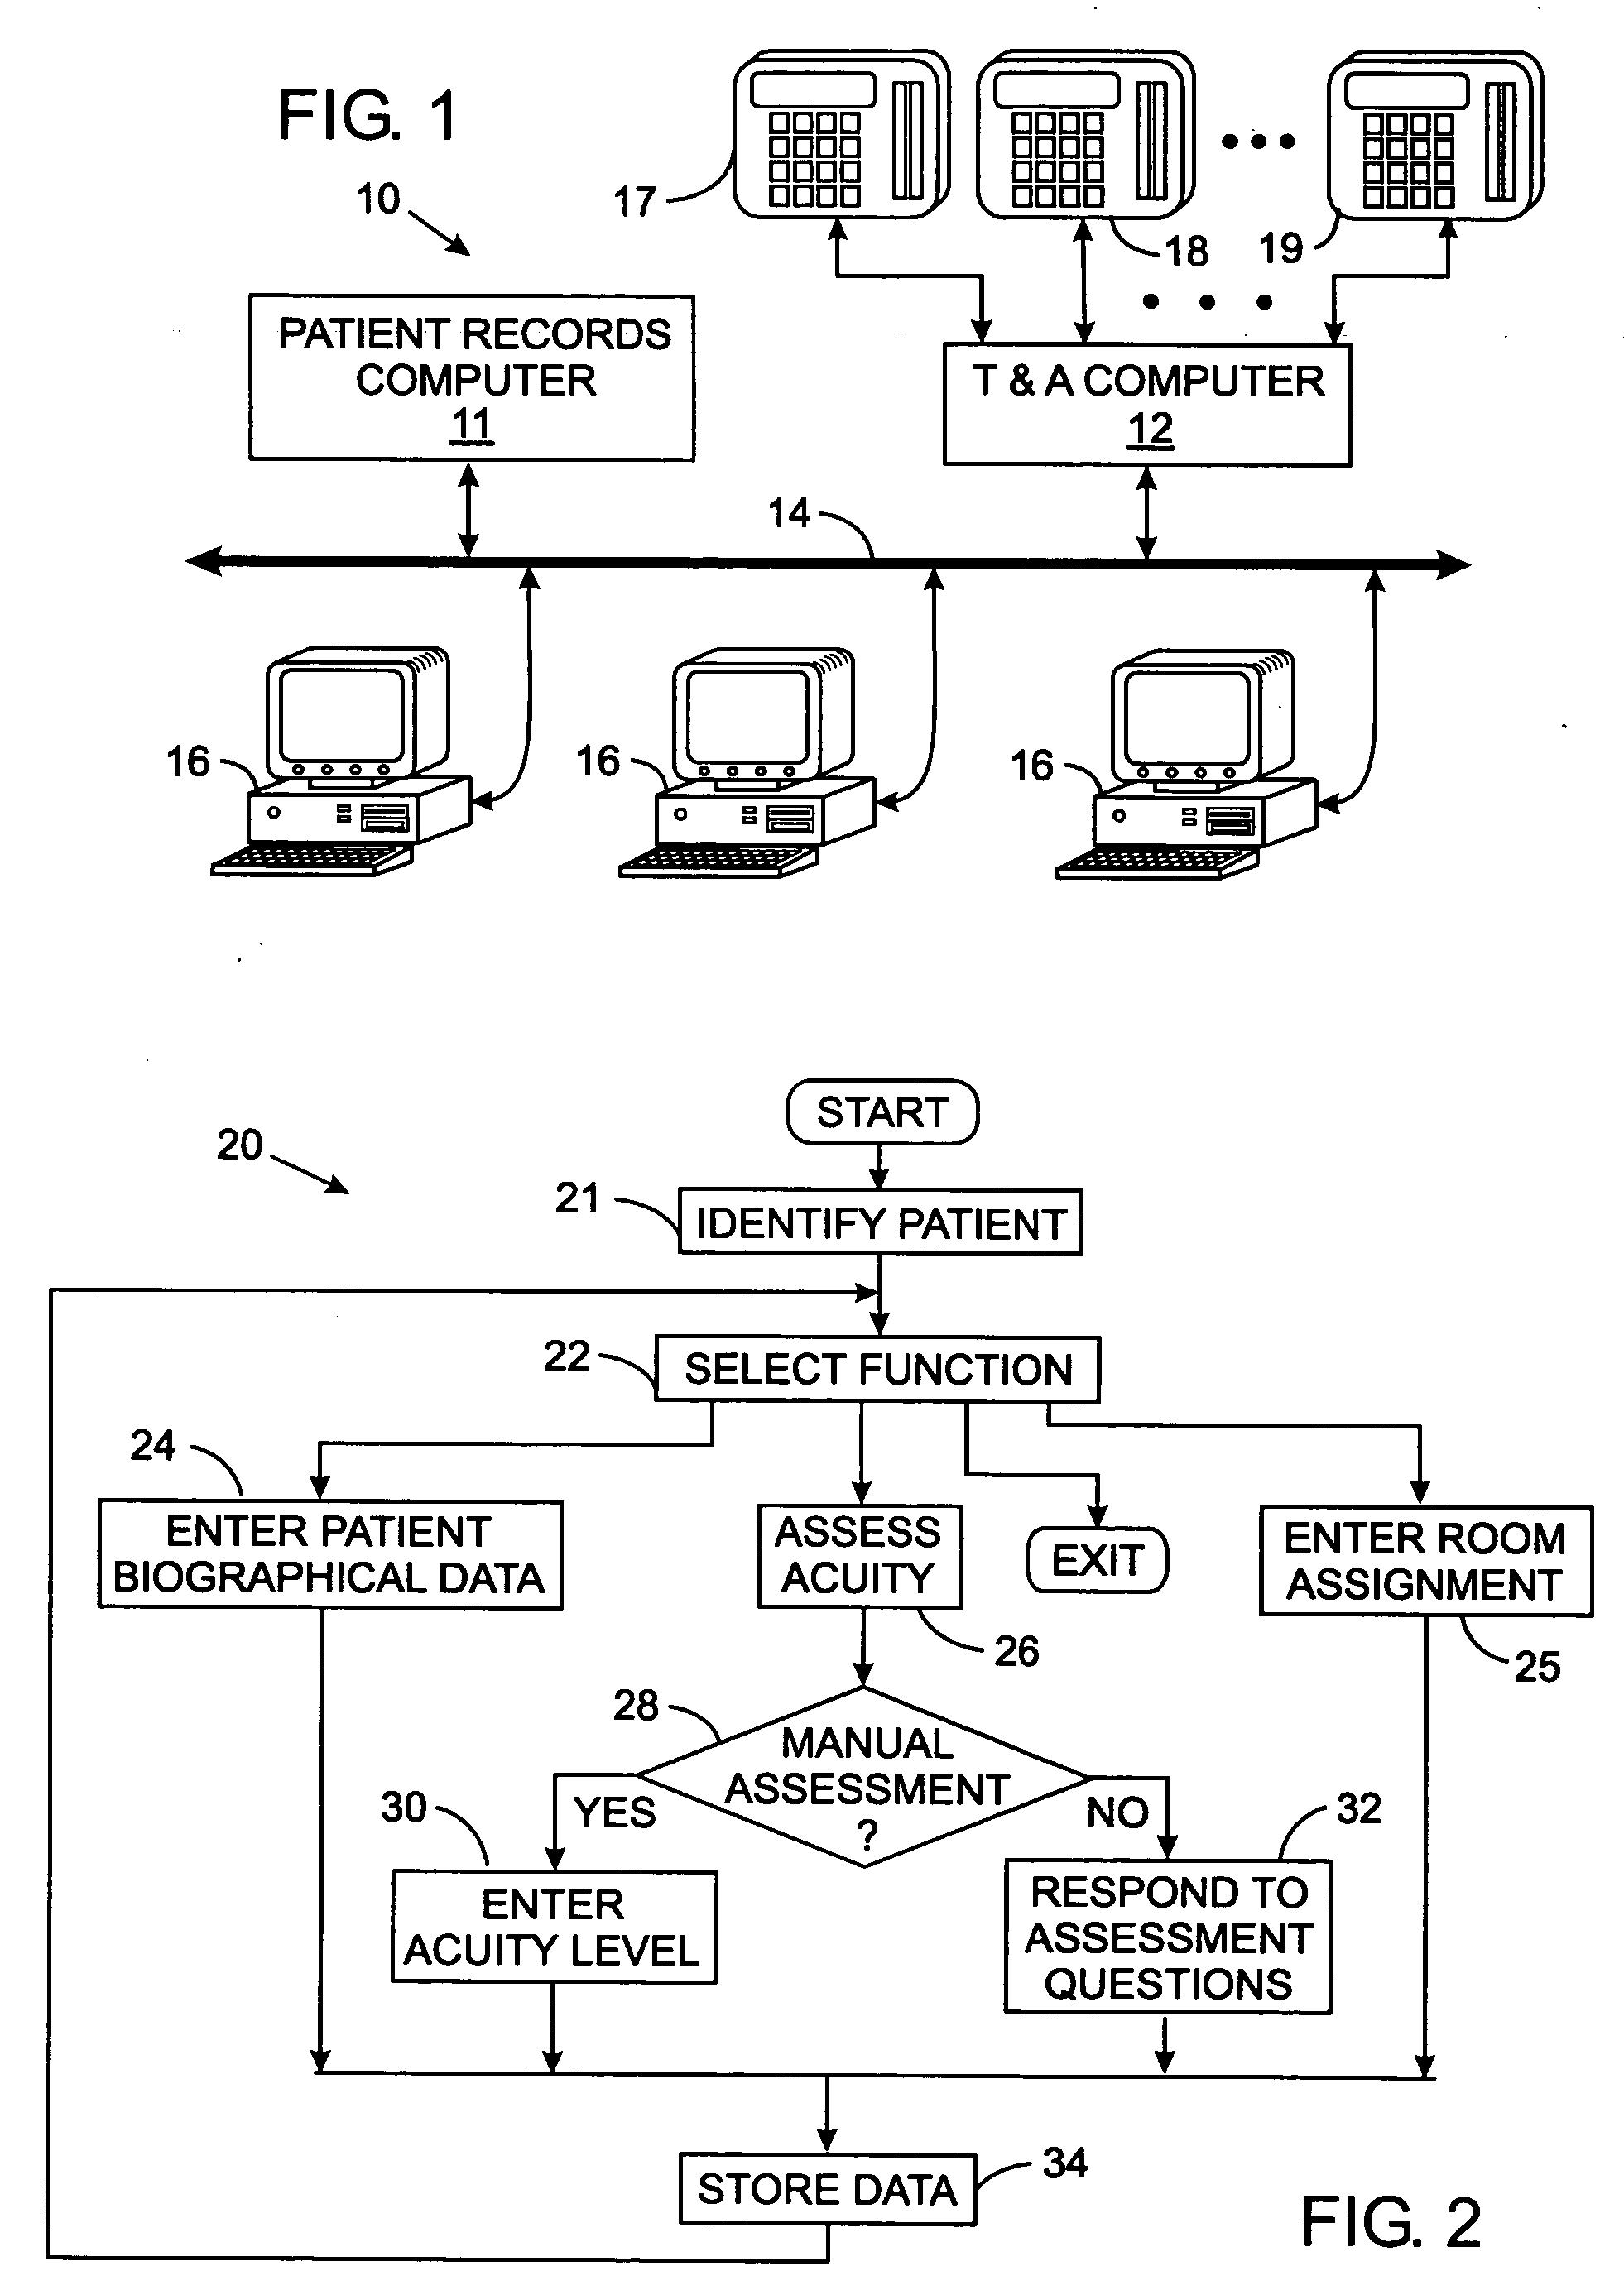 Medical facility employee scheduling method using patient acuity information